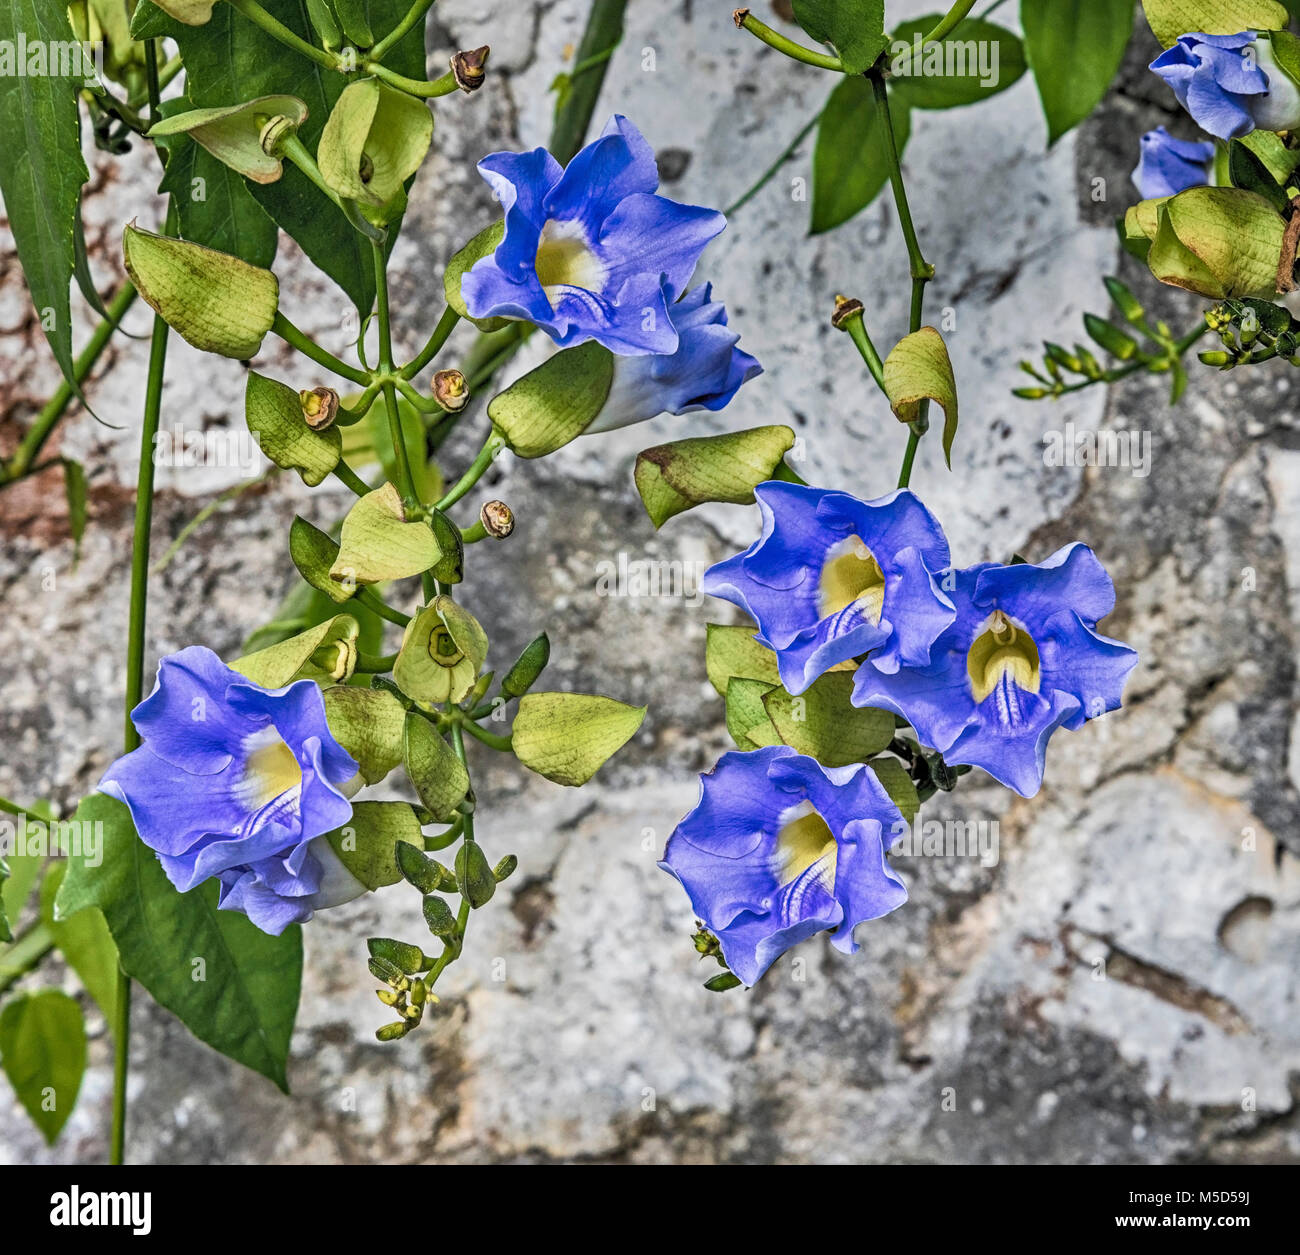 Blue Sky Vine or Thunbergia grandiflora is a climbing, twisting vine with gorgeous blue-violet flowers. Stock Photo